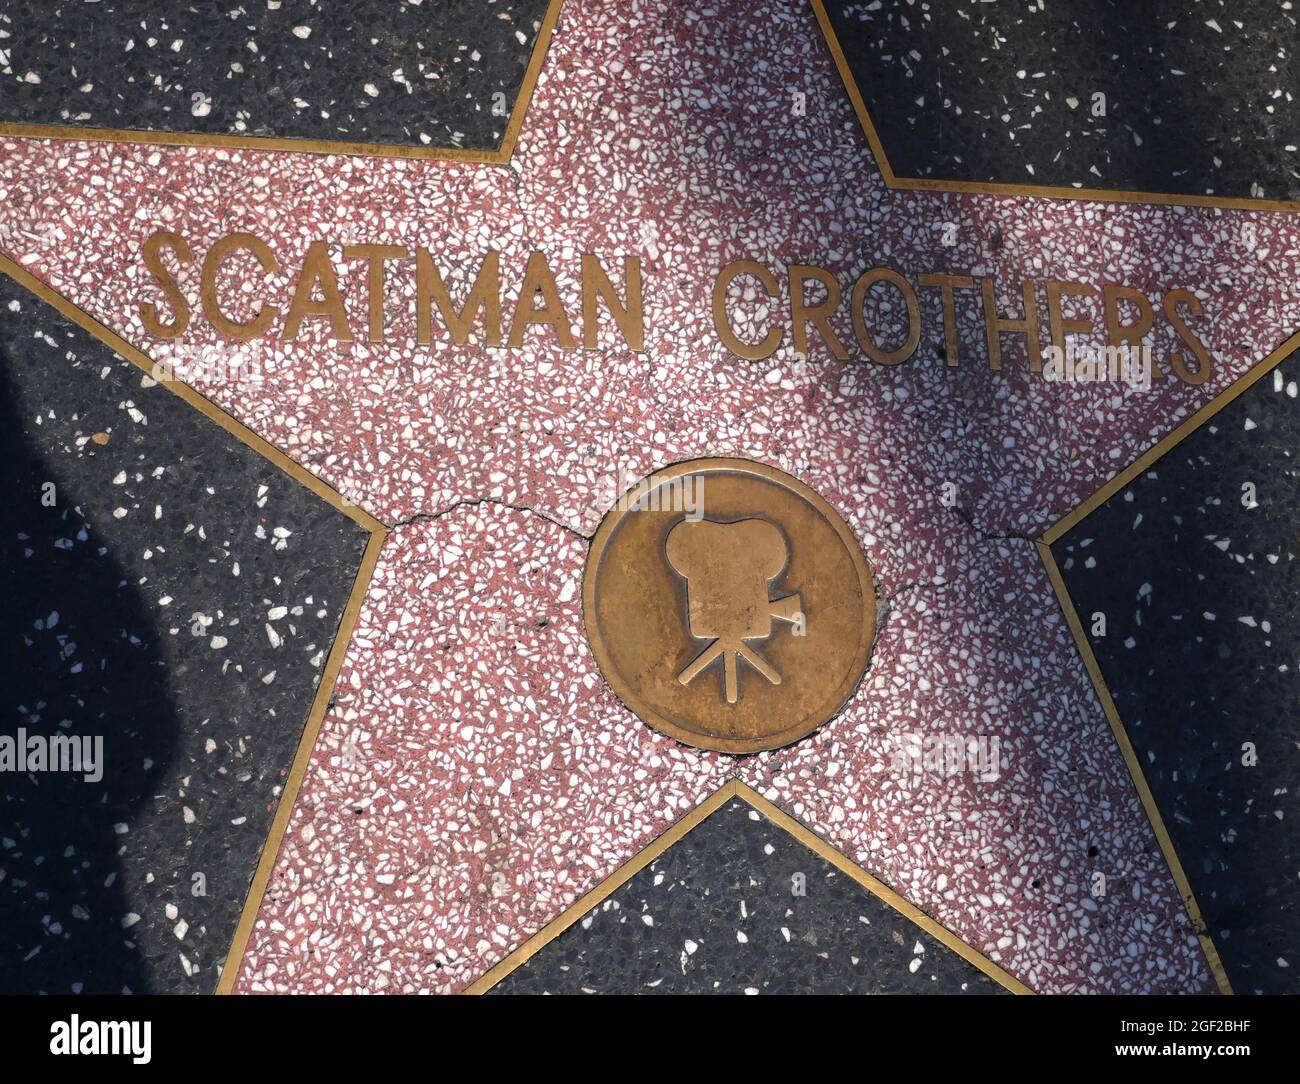 Hollywood, California, USA 17th August 2021 A general view of atmosphere of Actor Scatman Crothers Star on the Hollywood Walk of Fame on August 17, 2021 in Hollywood, California, USA. Photo by Barry King/Alamy Stock Photo Stock Photo